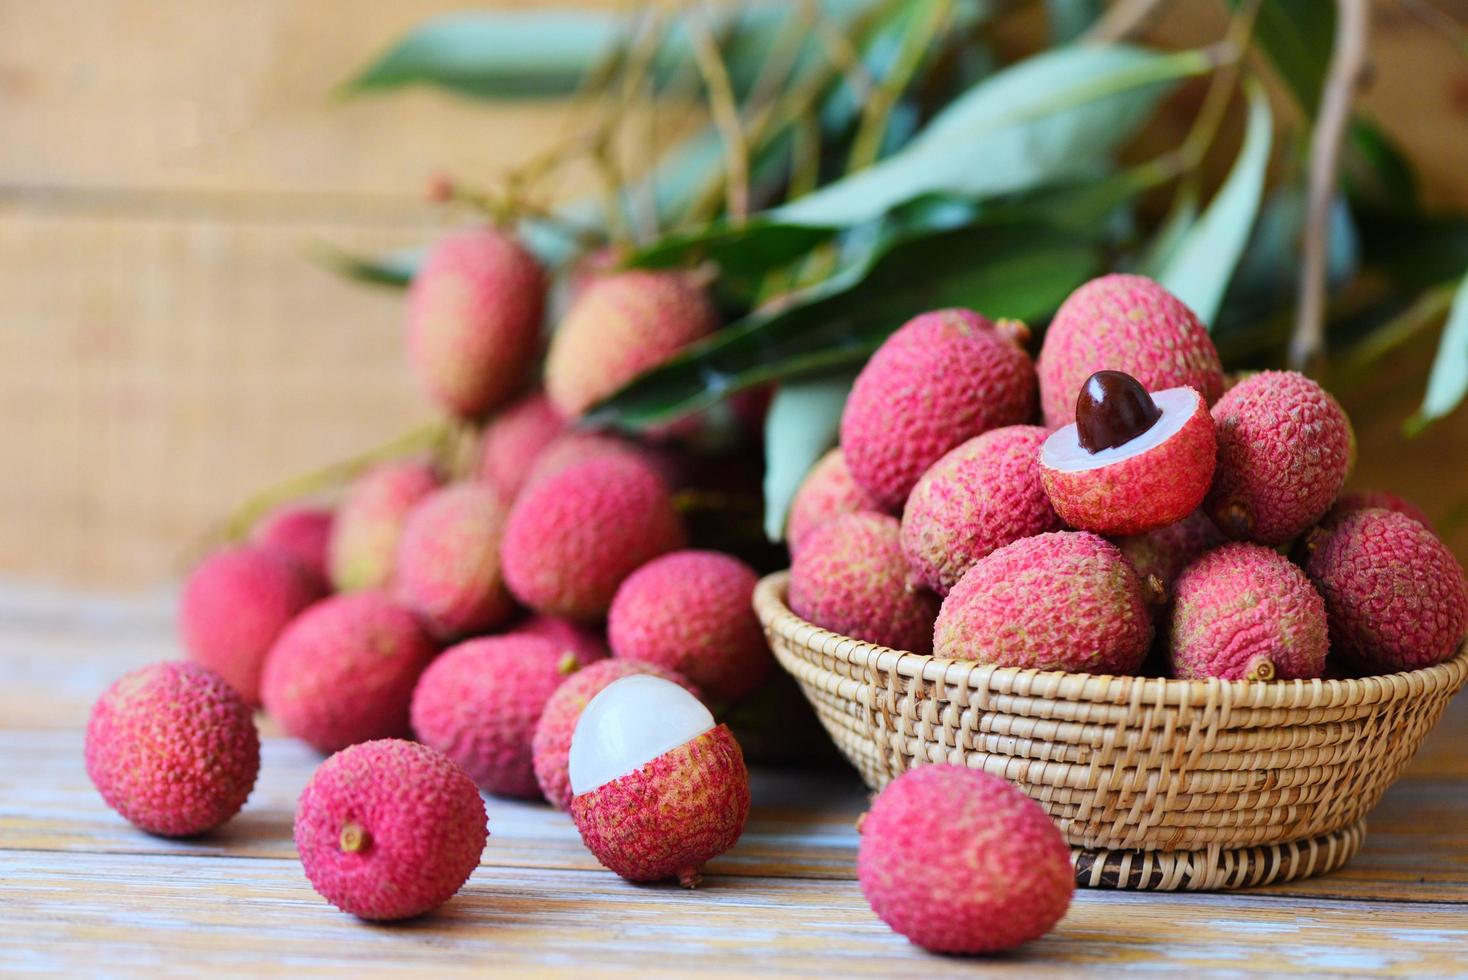 Lychee slice peeled on wooden - Fresh lychee with green leaves harvest in basket from tree tropical fruit summer in Thailand photo